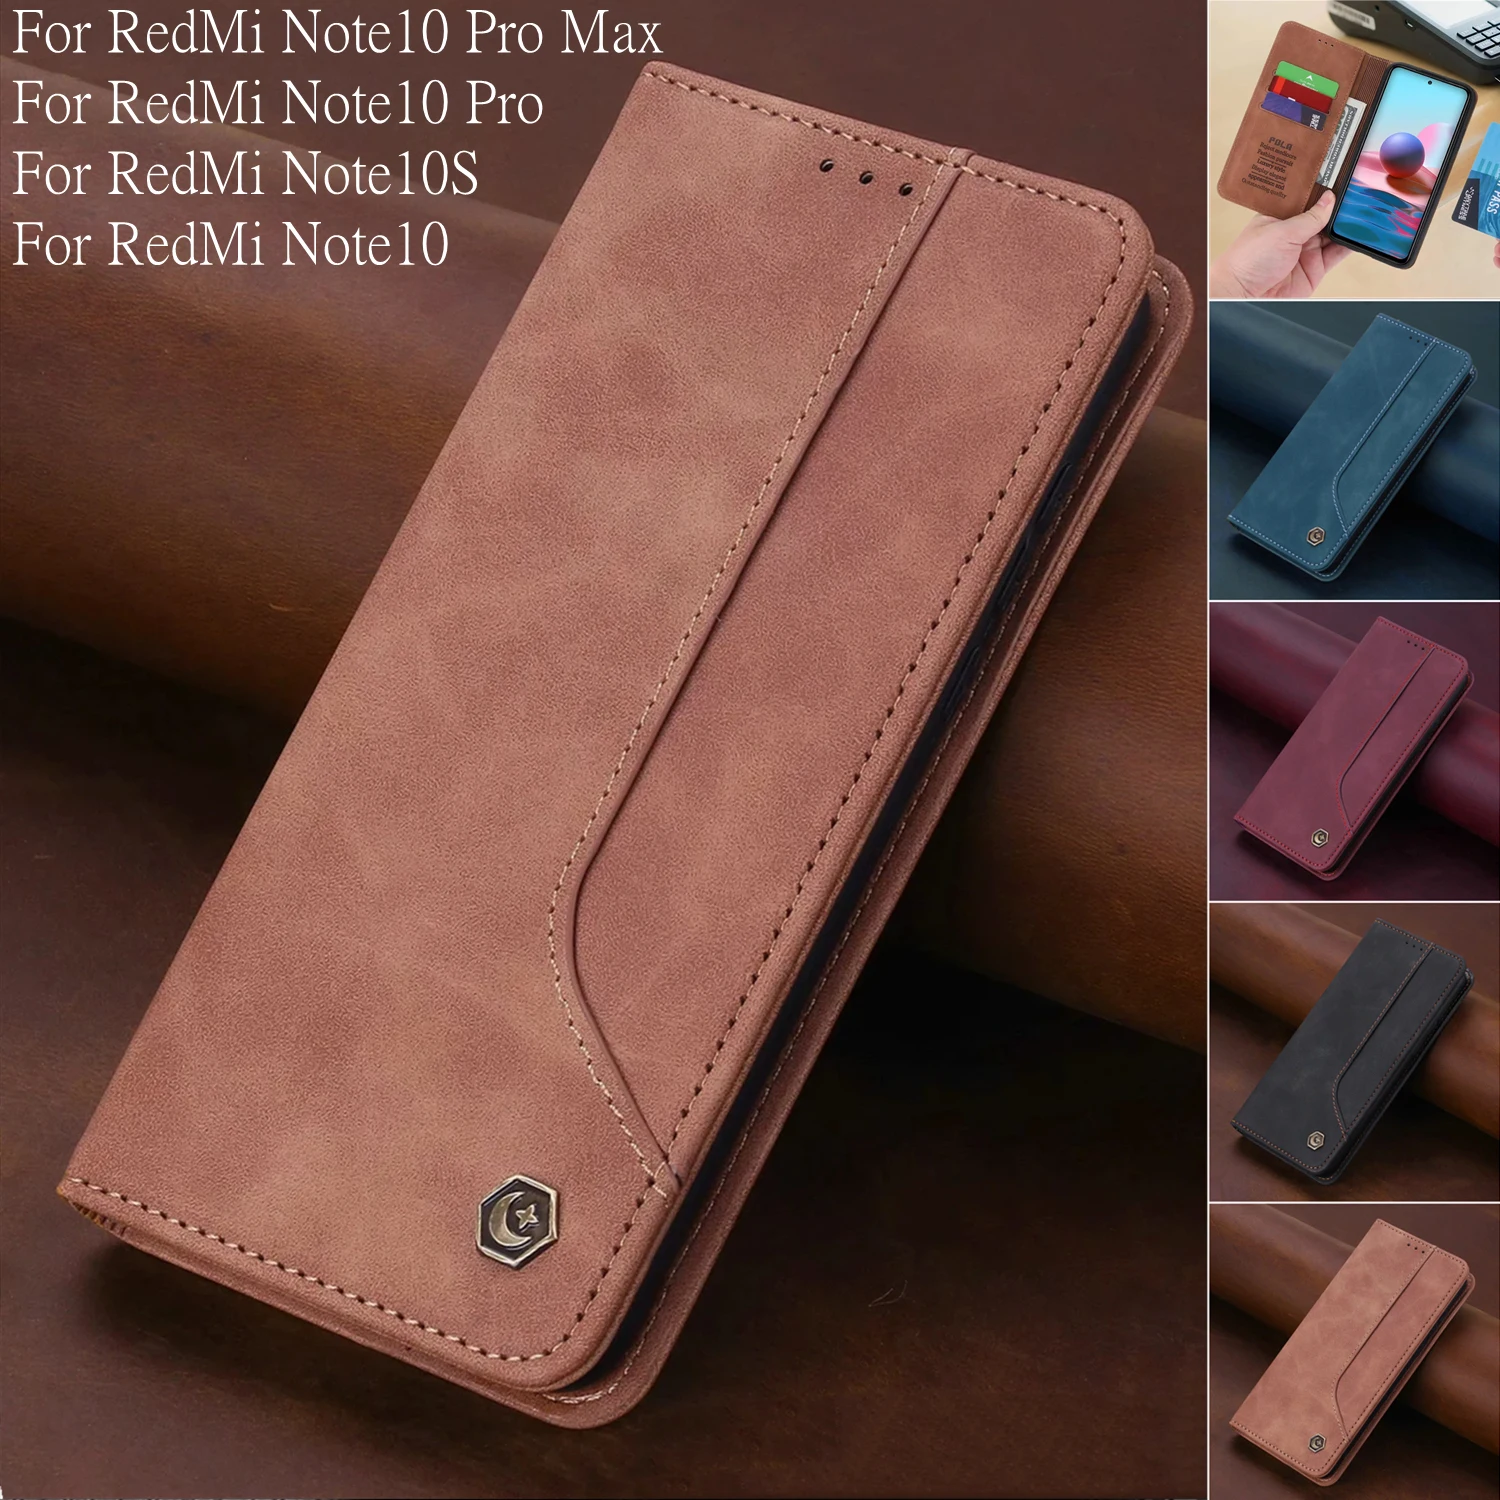 Case For Xiaomi Redmi Note 10 S 5G Flip Cover For Redmi Note 10 10S Pro Max Case Book Style Leather Wallet Magnetic Card Holder